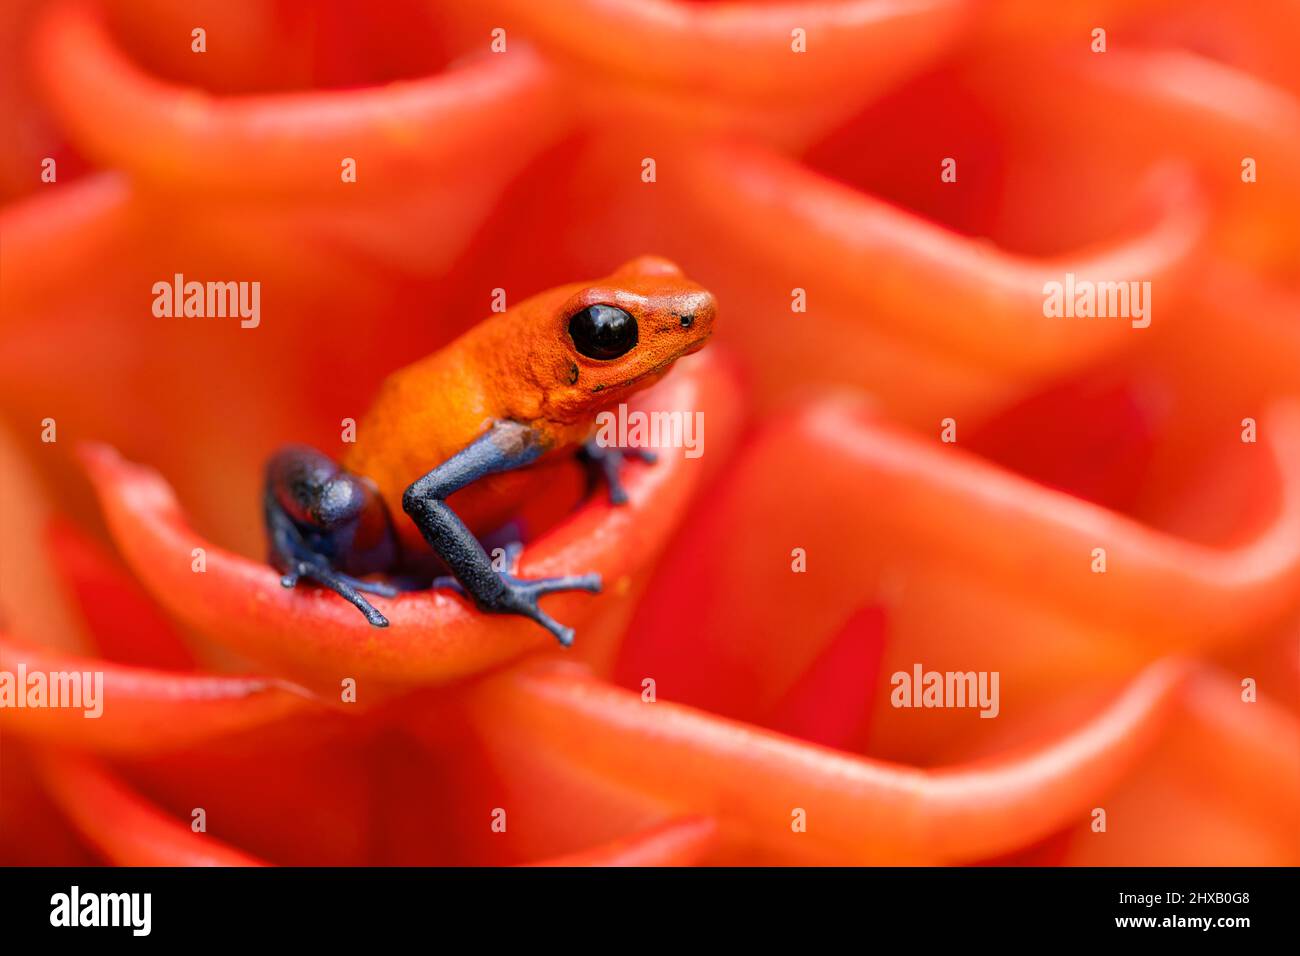 The strawberry poison frog or strawberry poison-dart frog (Oophaga pumilio, formerly Dendrobates pumilio) is a species of small poison dart frog Stock Photo